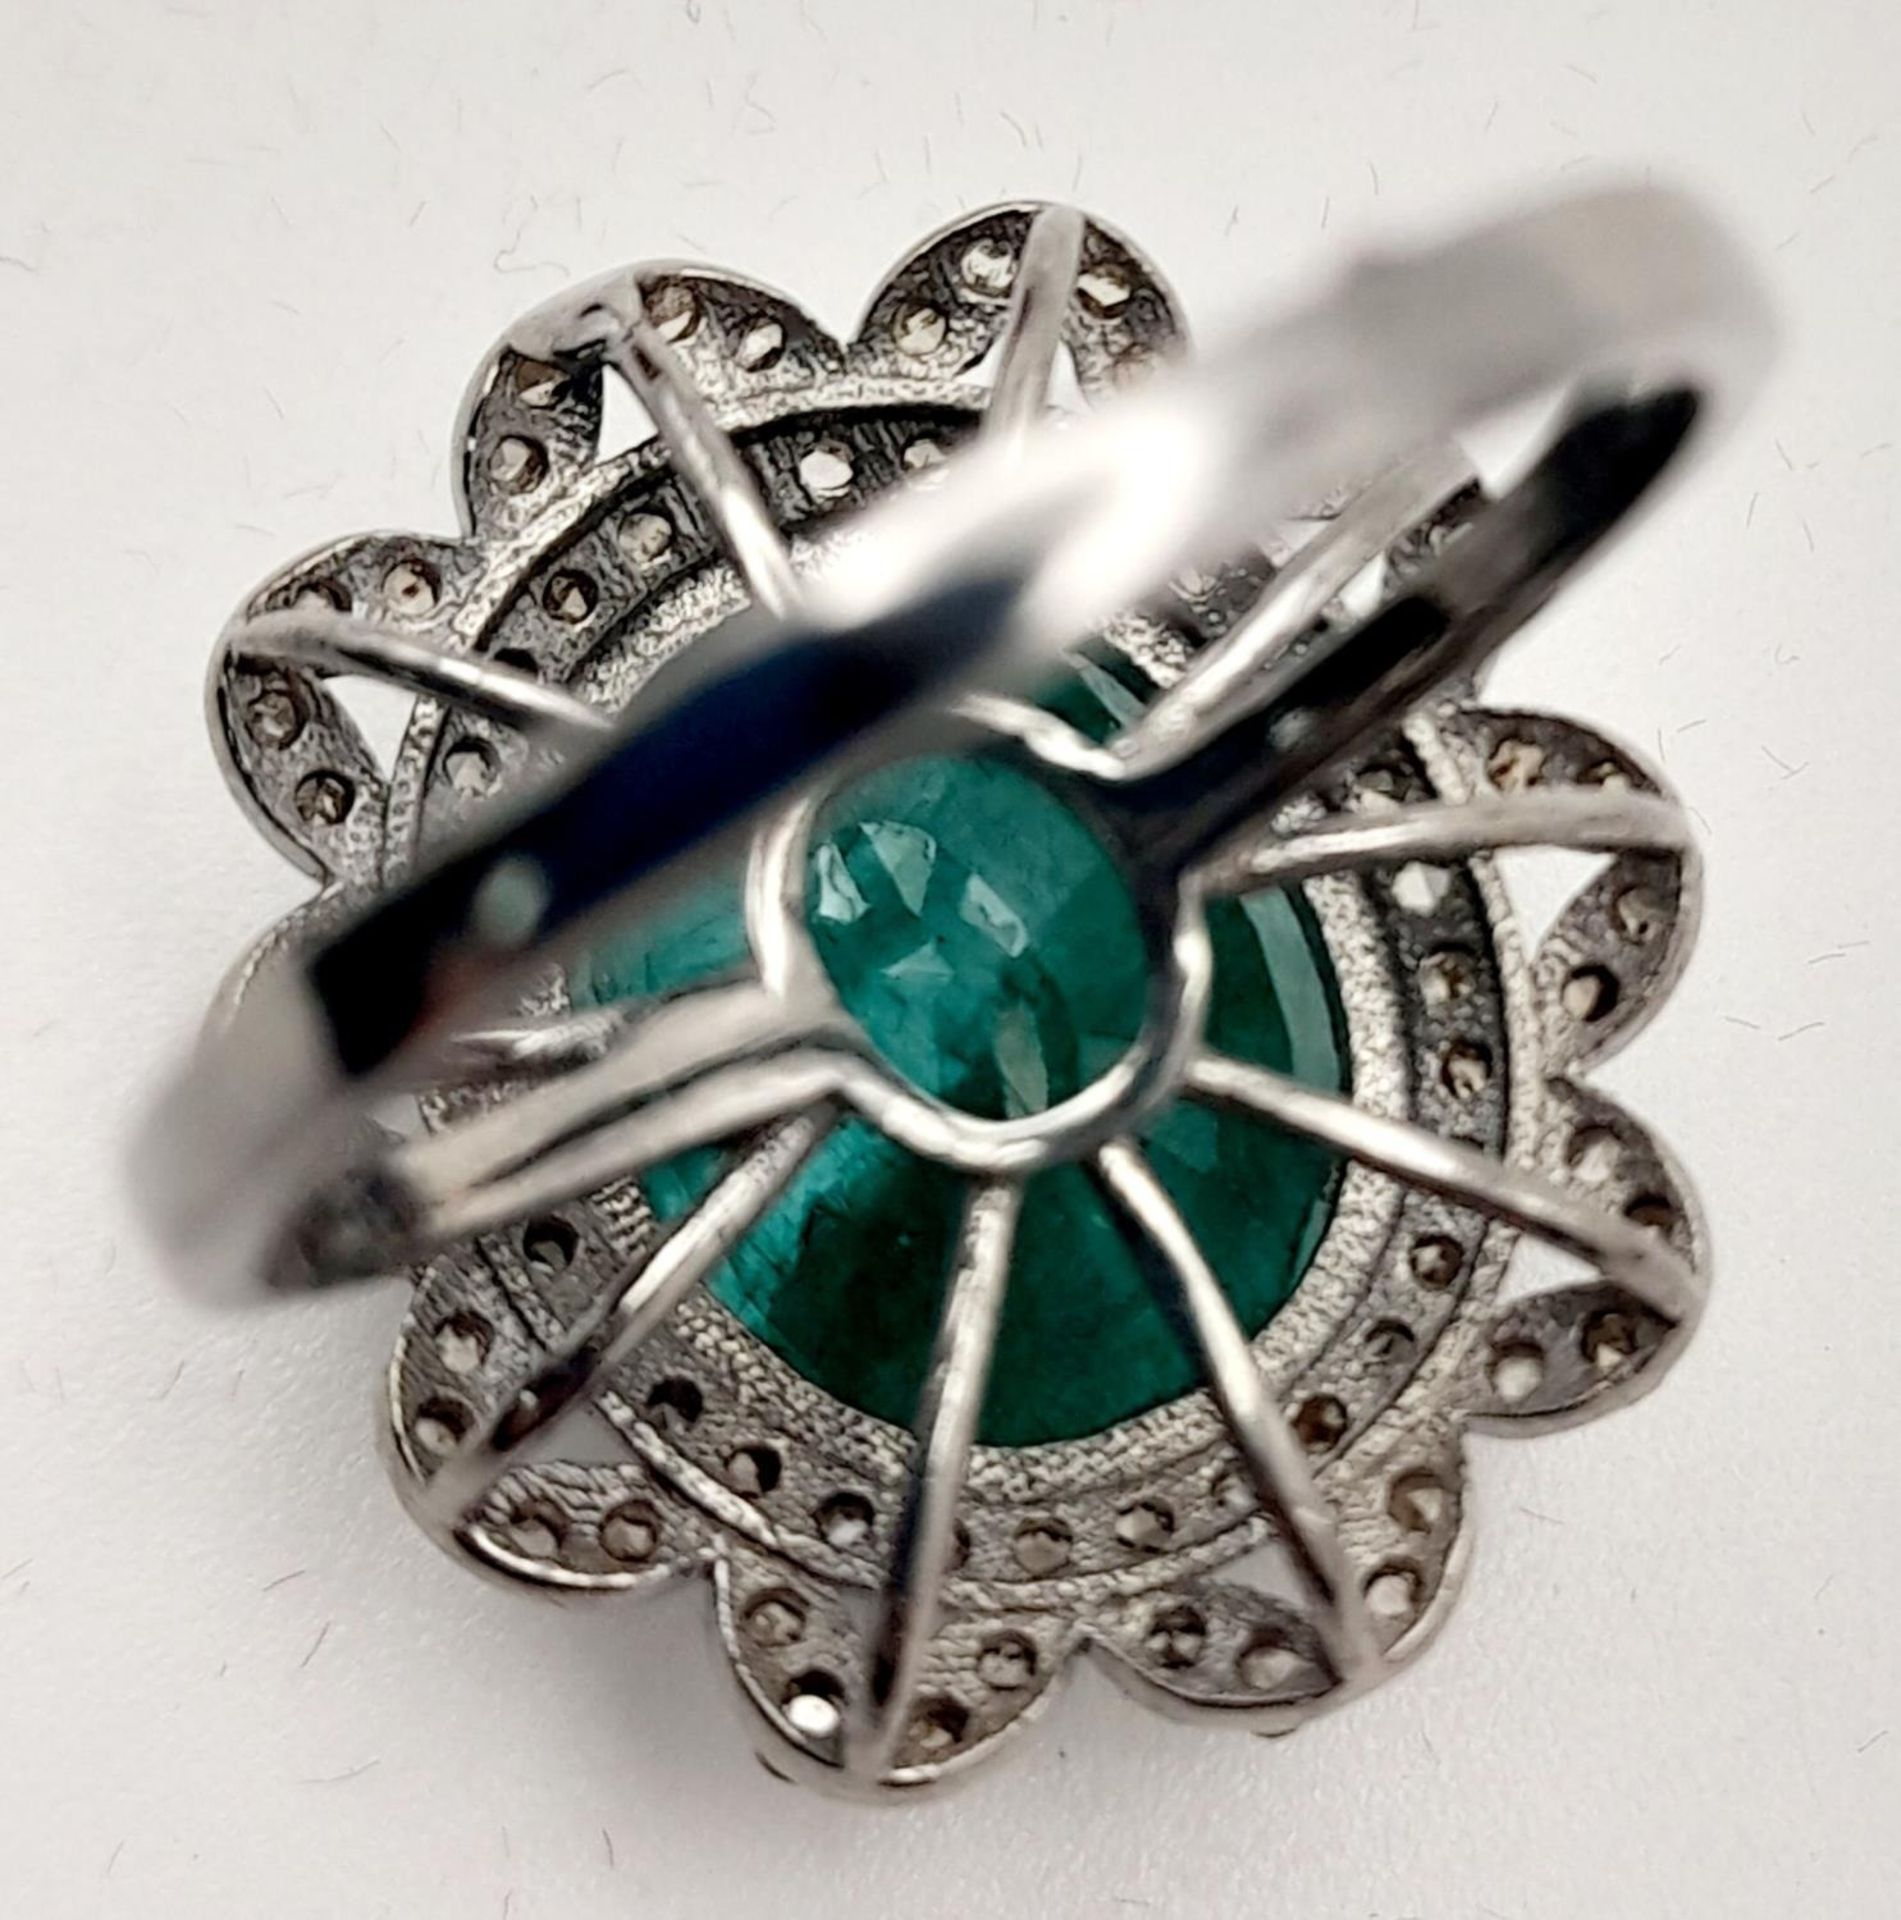 A 6.15ct Emerald Ring with 0.75ctw of Diamond Accents. Set in 925 Silver. Size N. Comes with a - Bild 5 aus 6